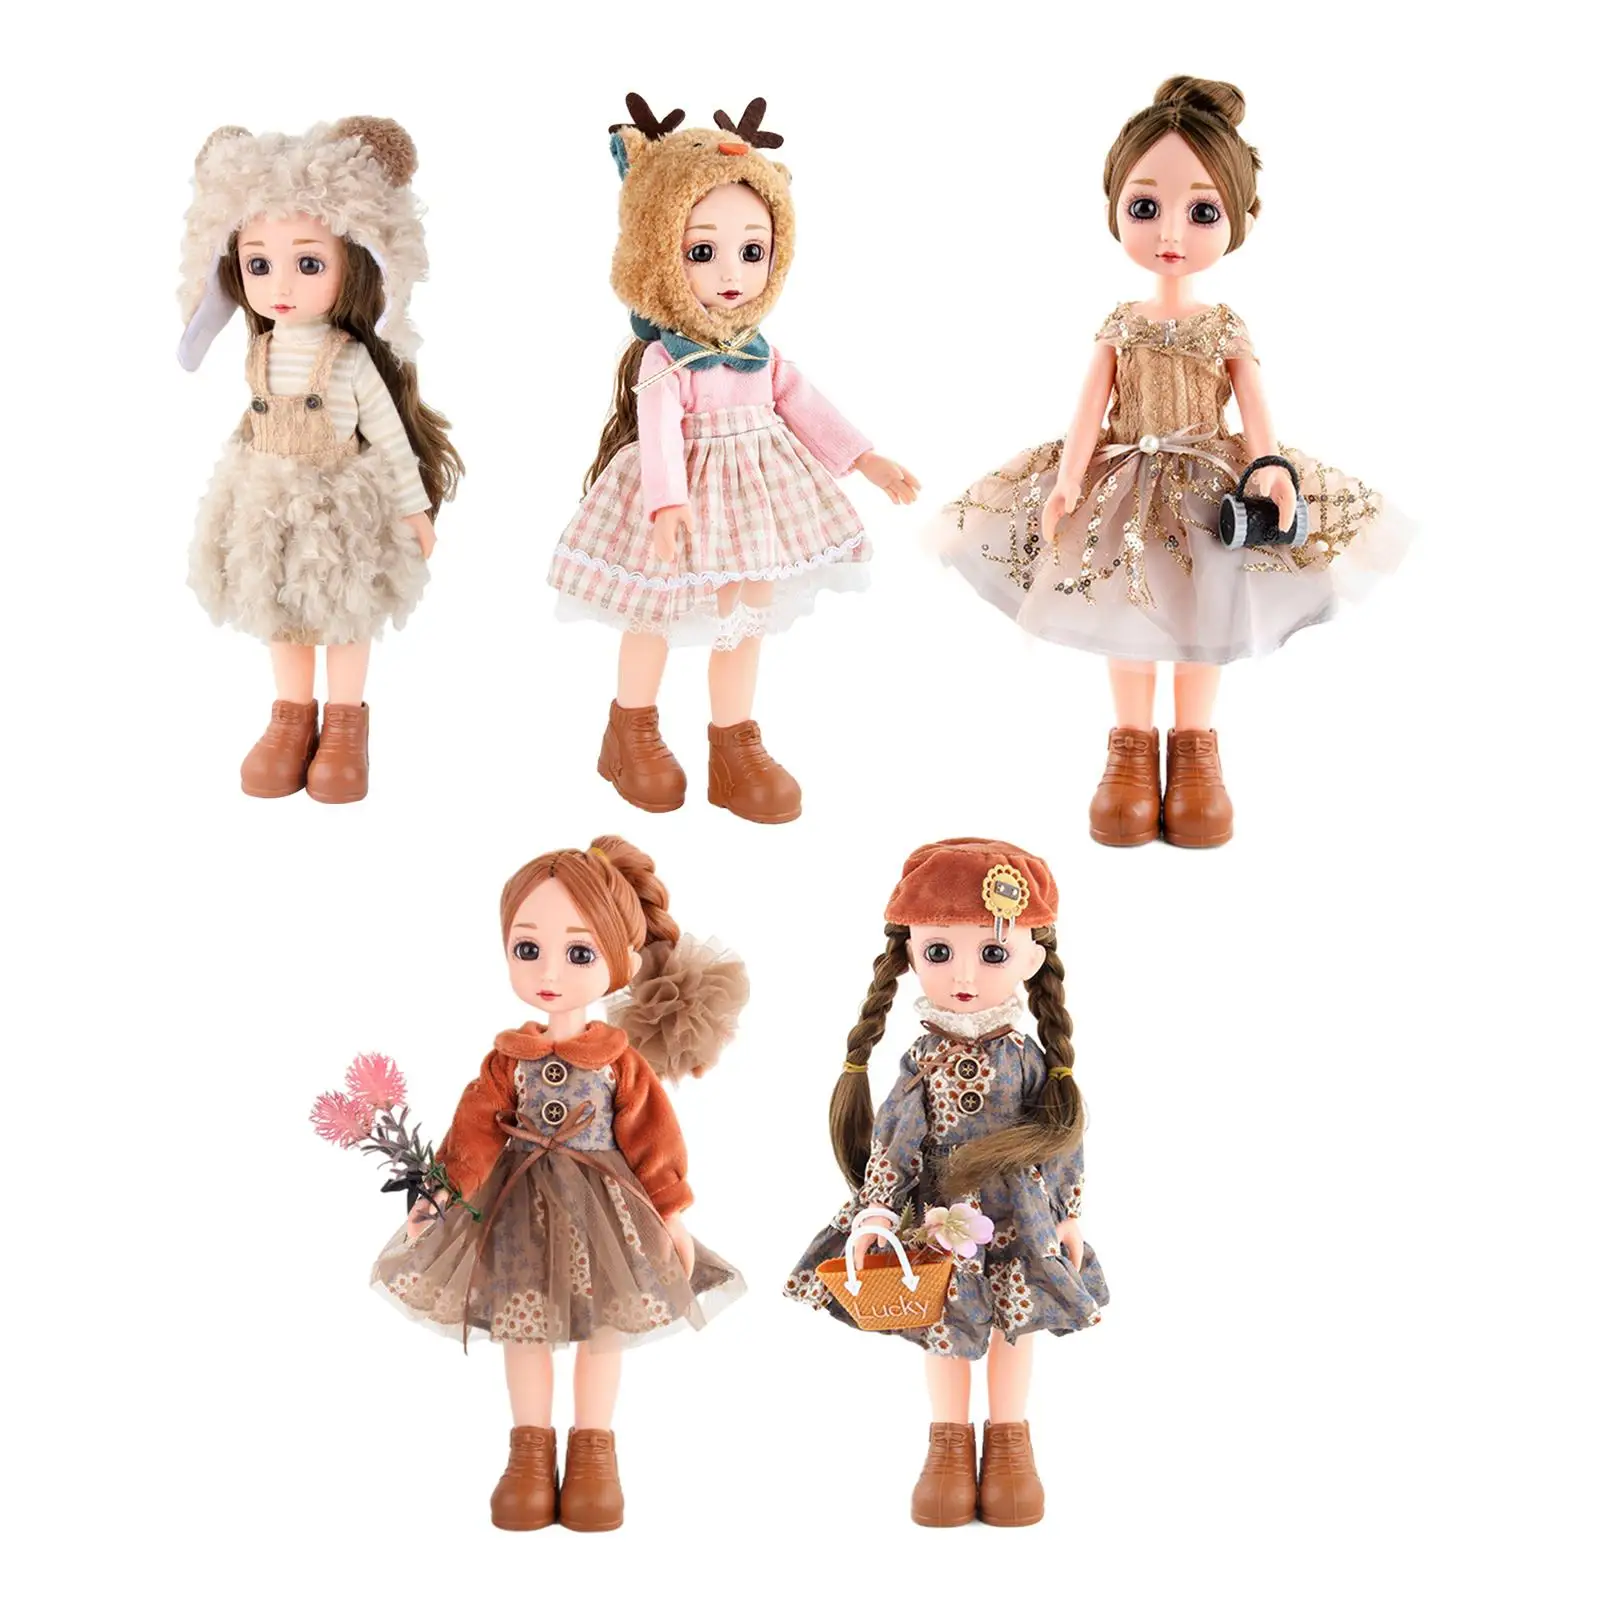 Beautiful Girl Doll Outfit Princess Collection Birthday Gifts 12 inch Baby Doll for Kids